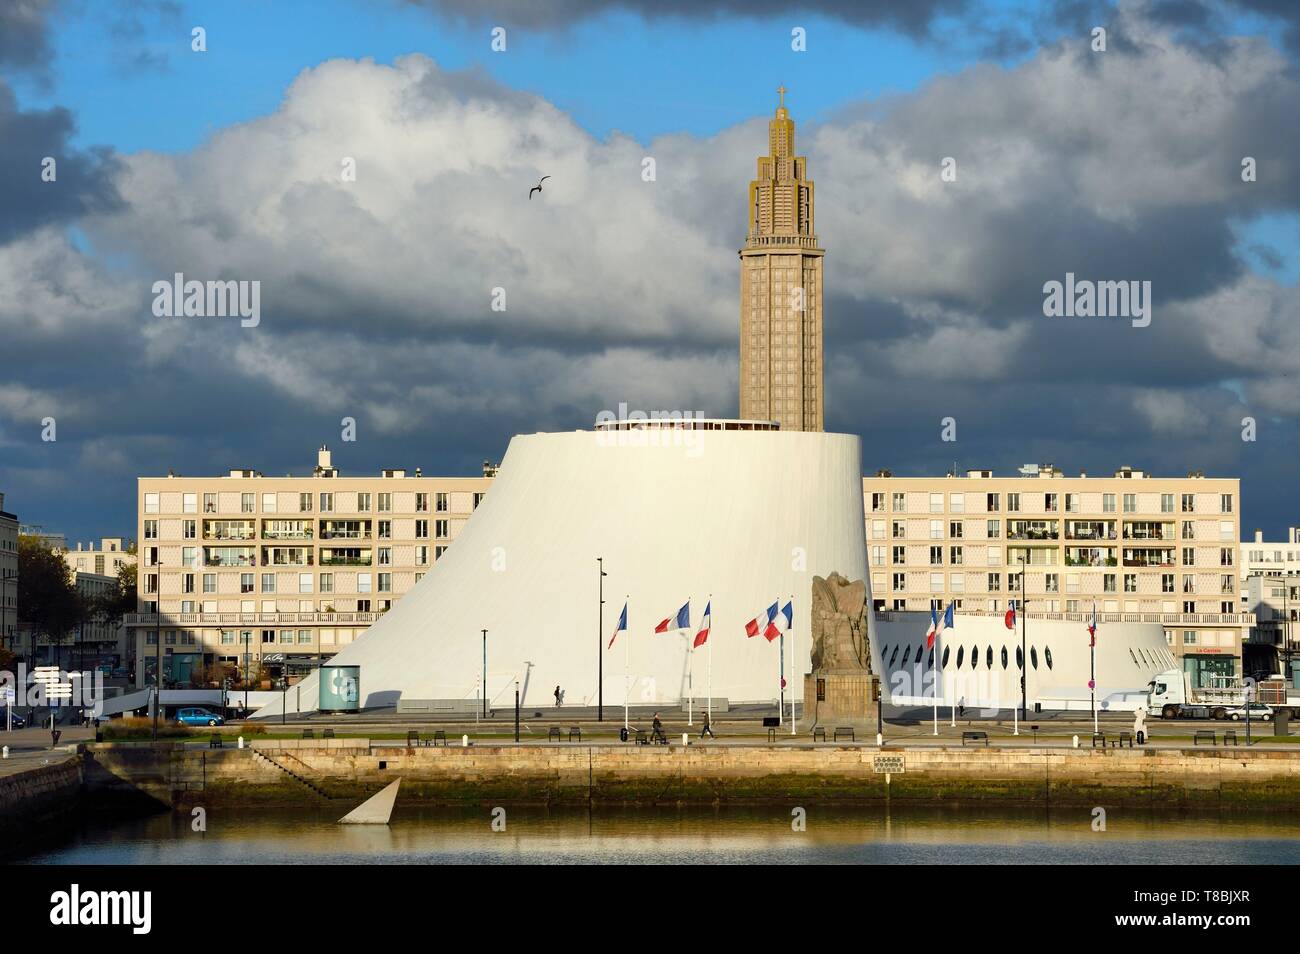 France, Seine Maritime, Le Havre, Downtown rebuilt by Auguste Perret listed as World Heritage by UNESCO, Perret buildings around the Bassin du Commerce, the Volcan created by Oscar Niemeyer and the Lantern tower of Saint Joseph church Stock Photo